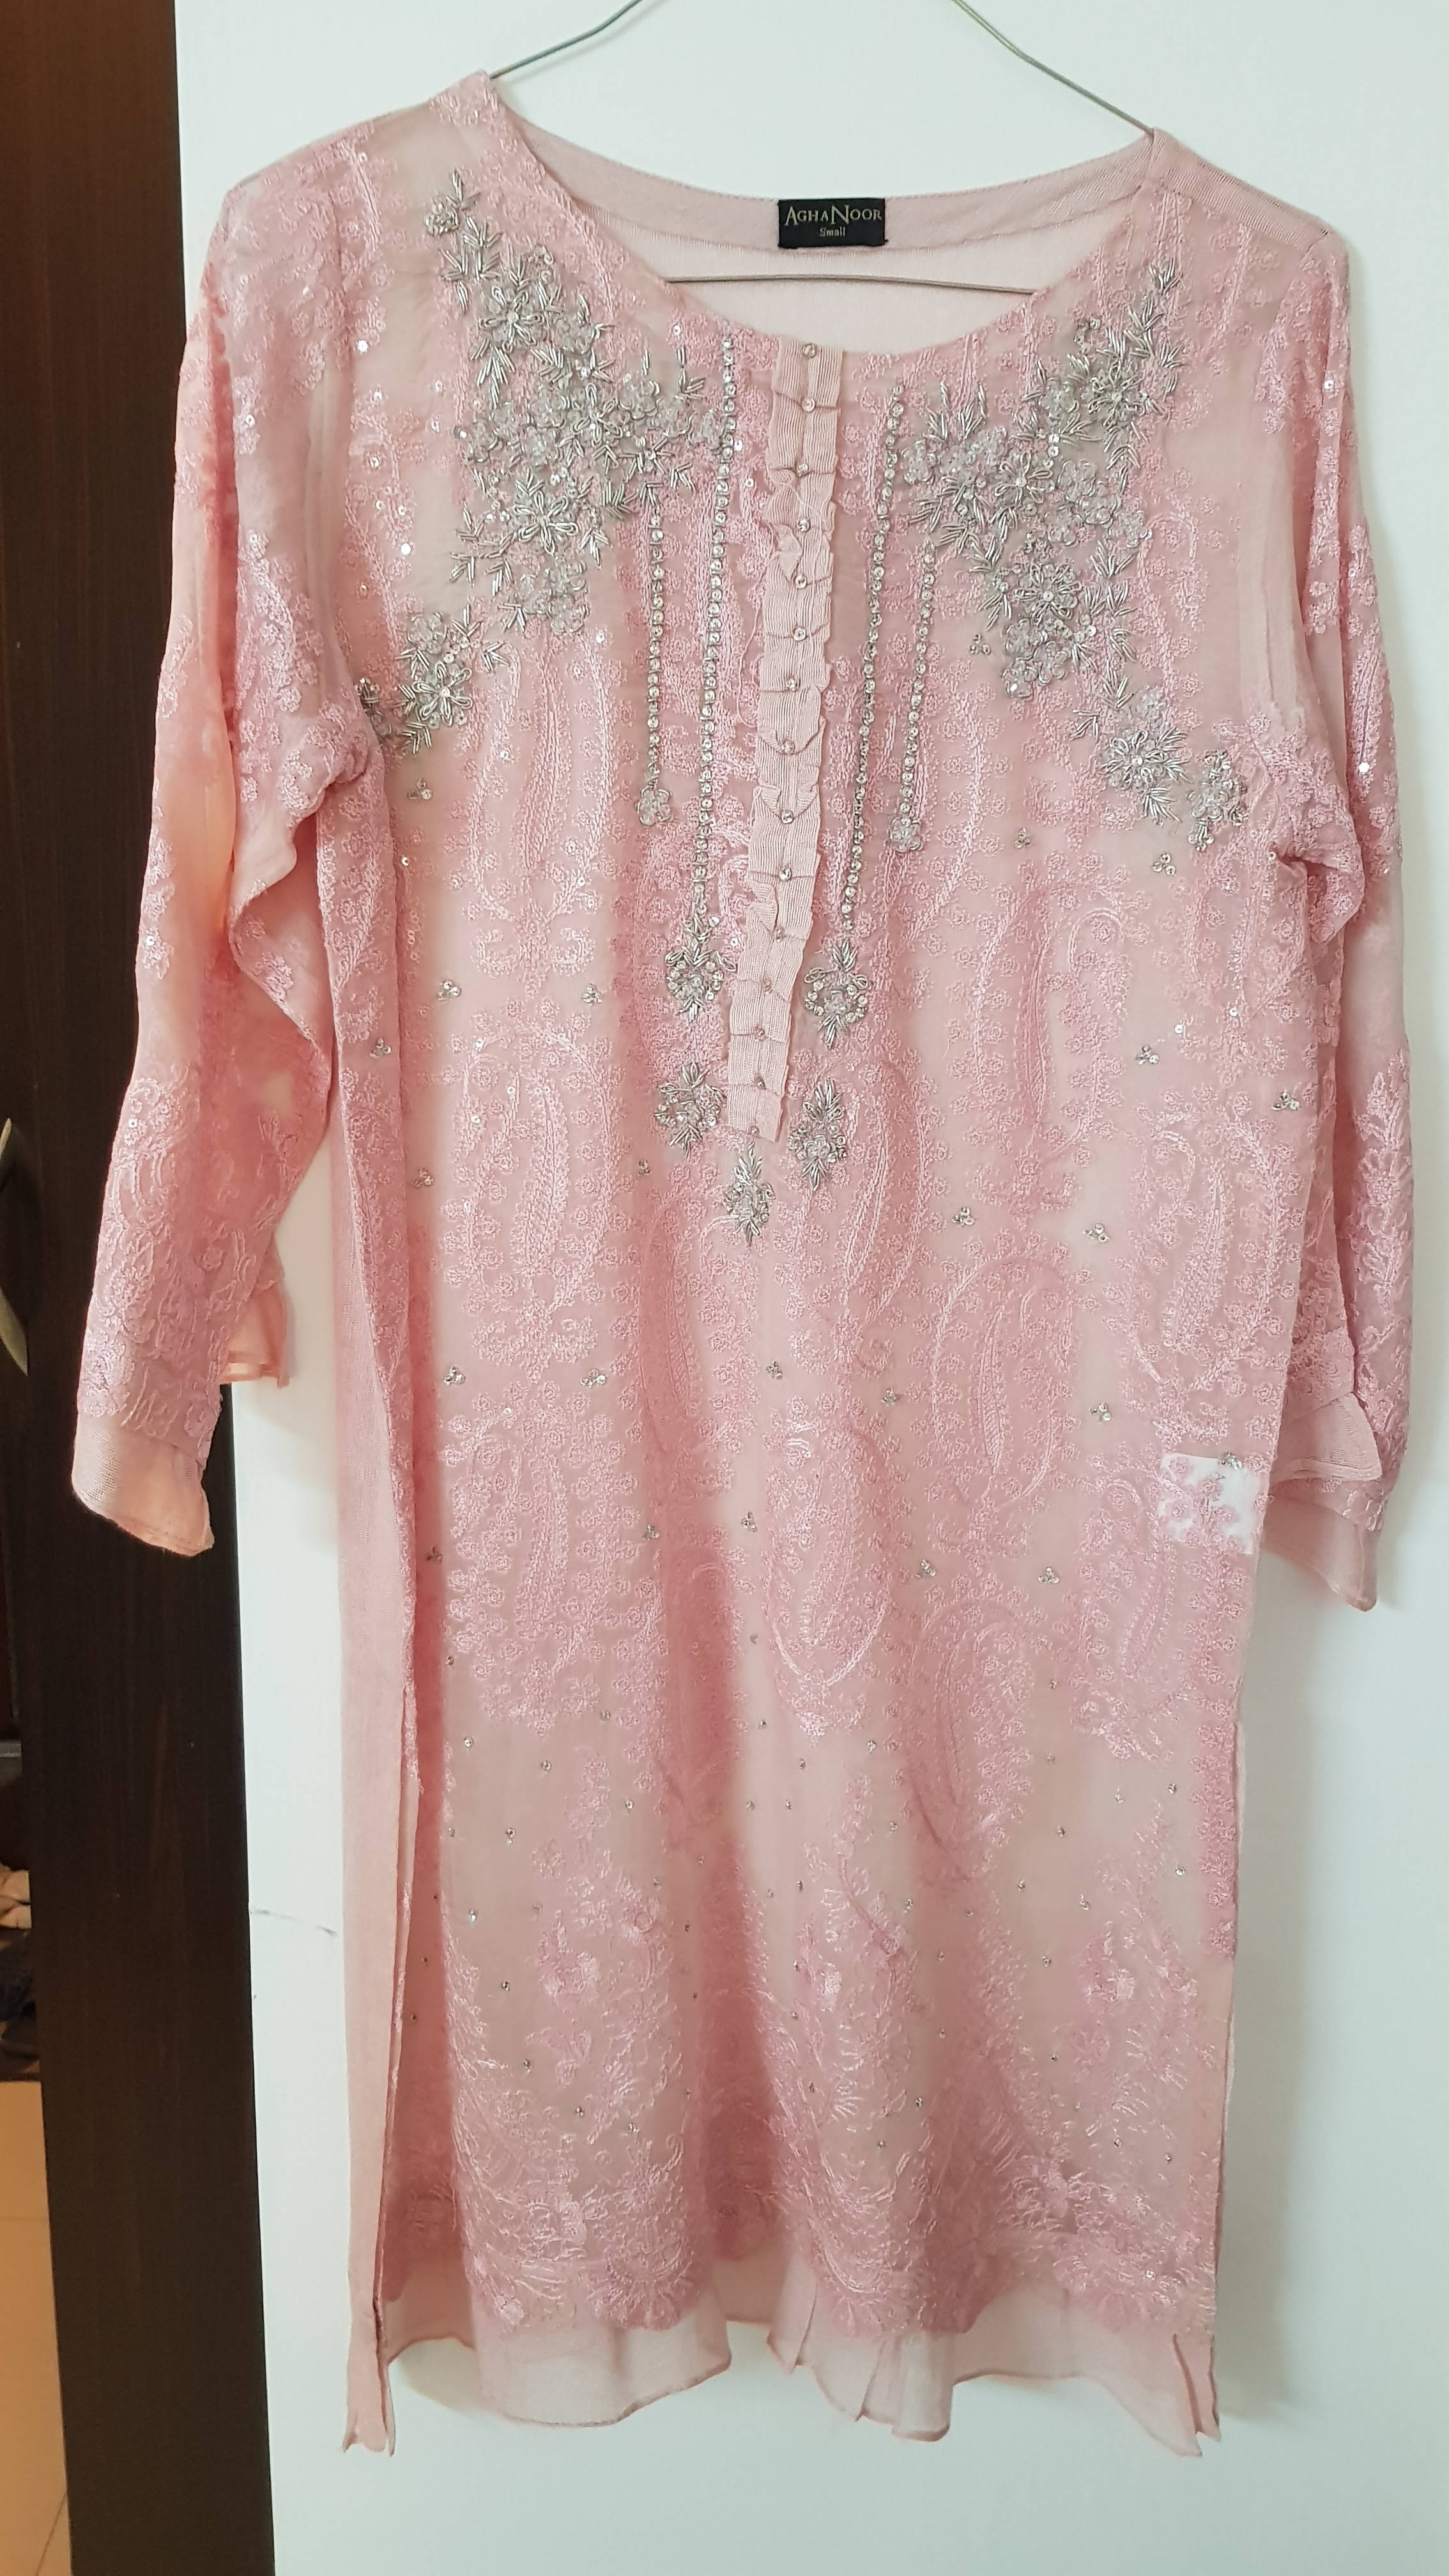 Agha Noor | dress 4 pc Pink colour | Women Formals | Worn Once